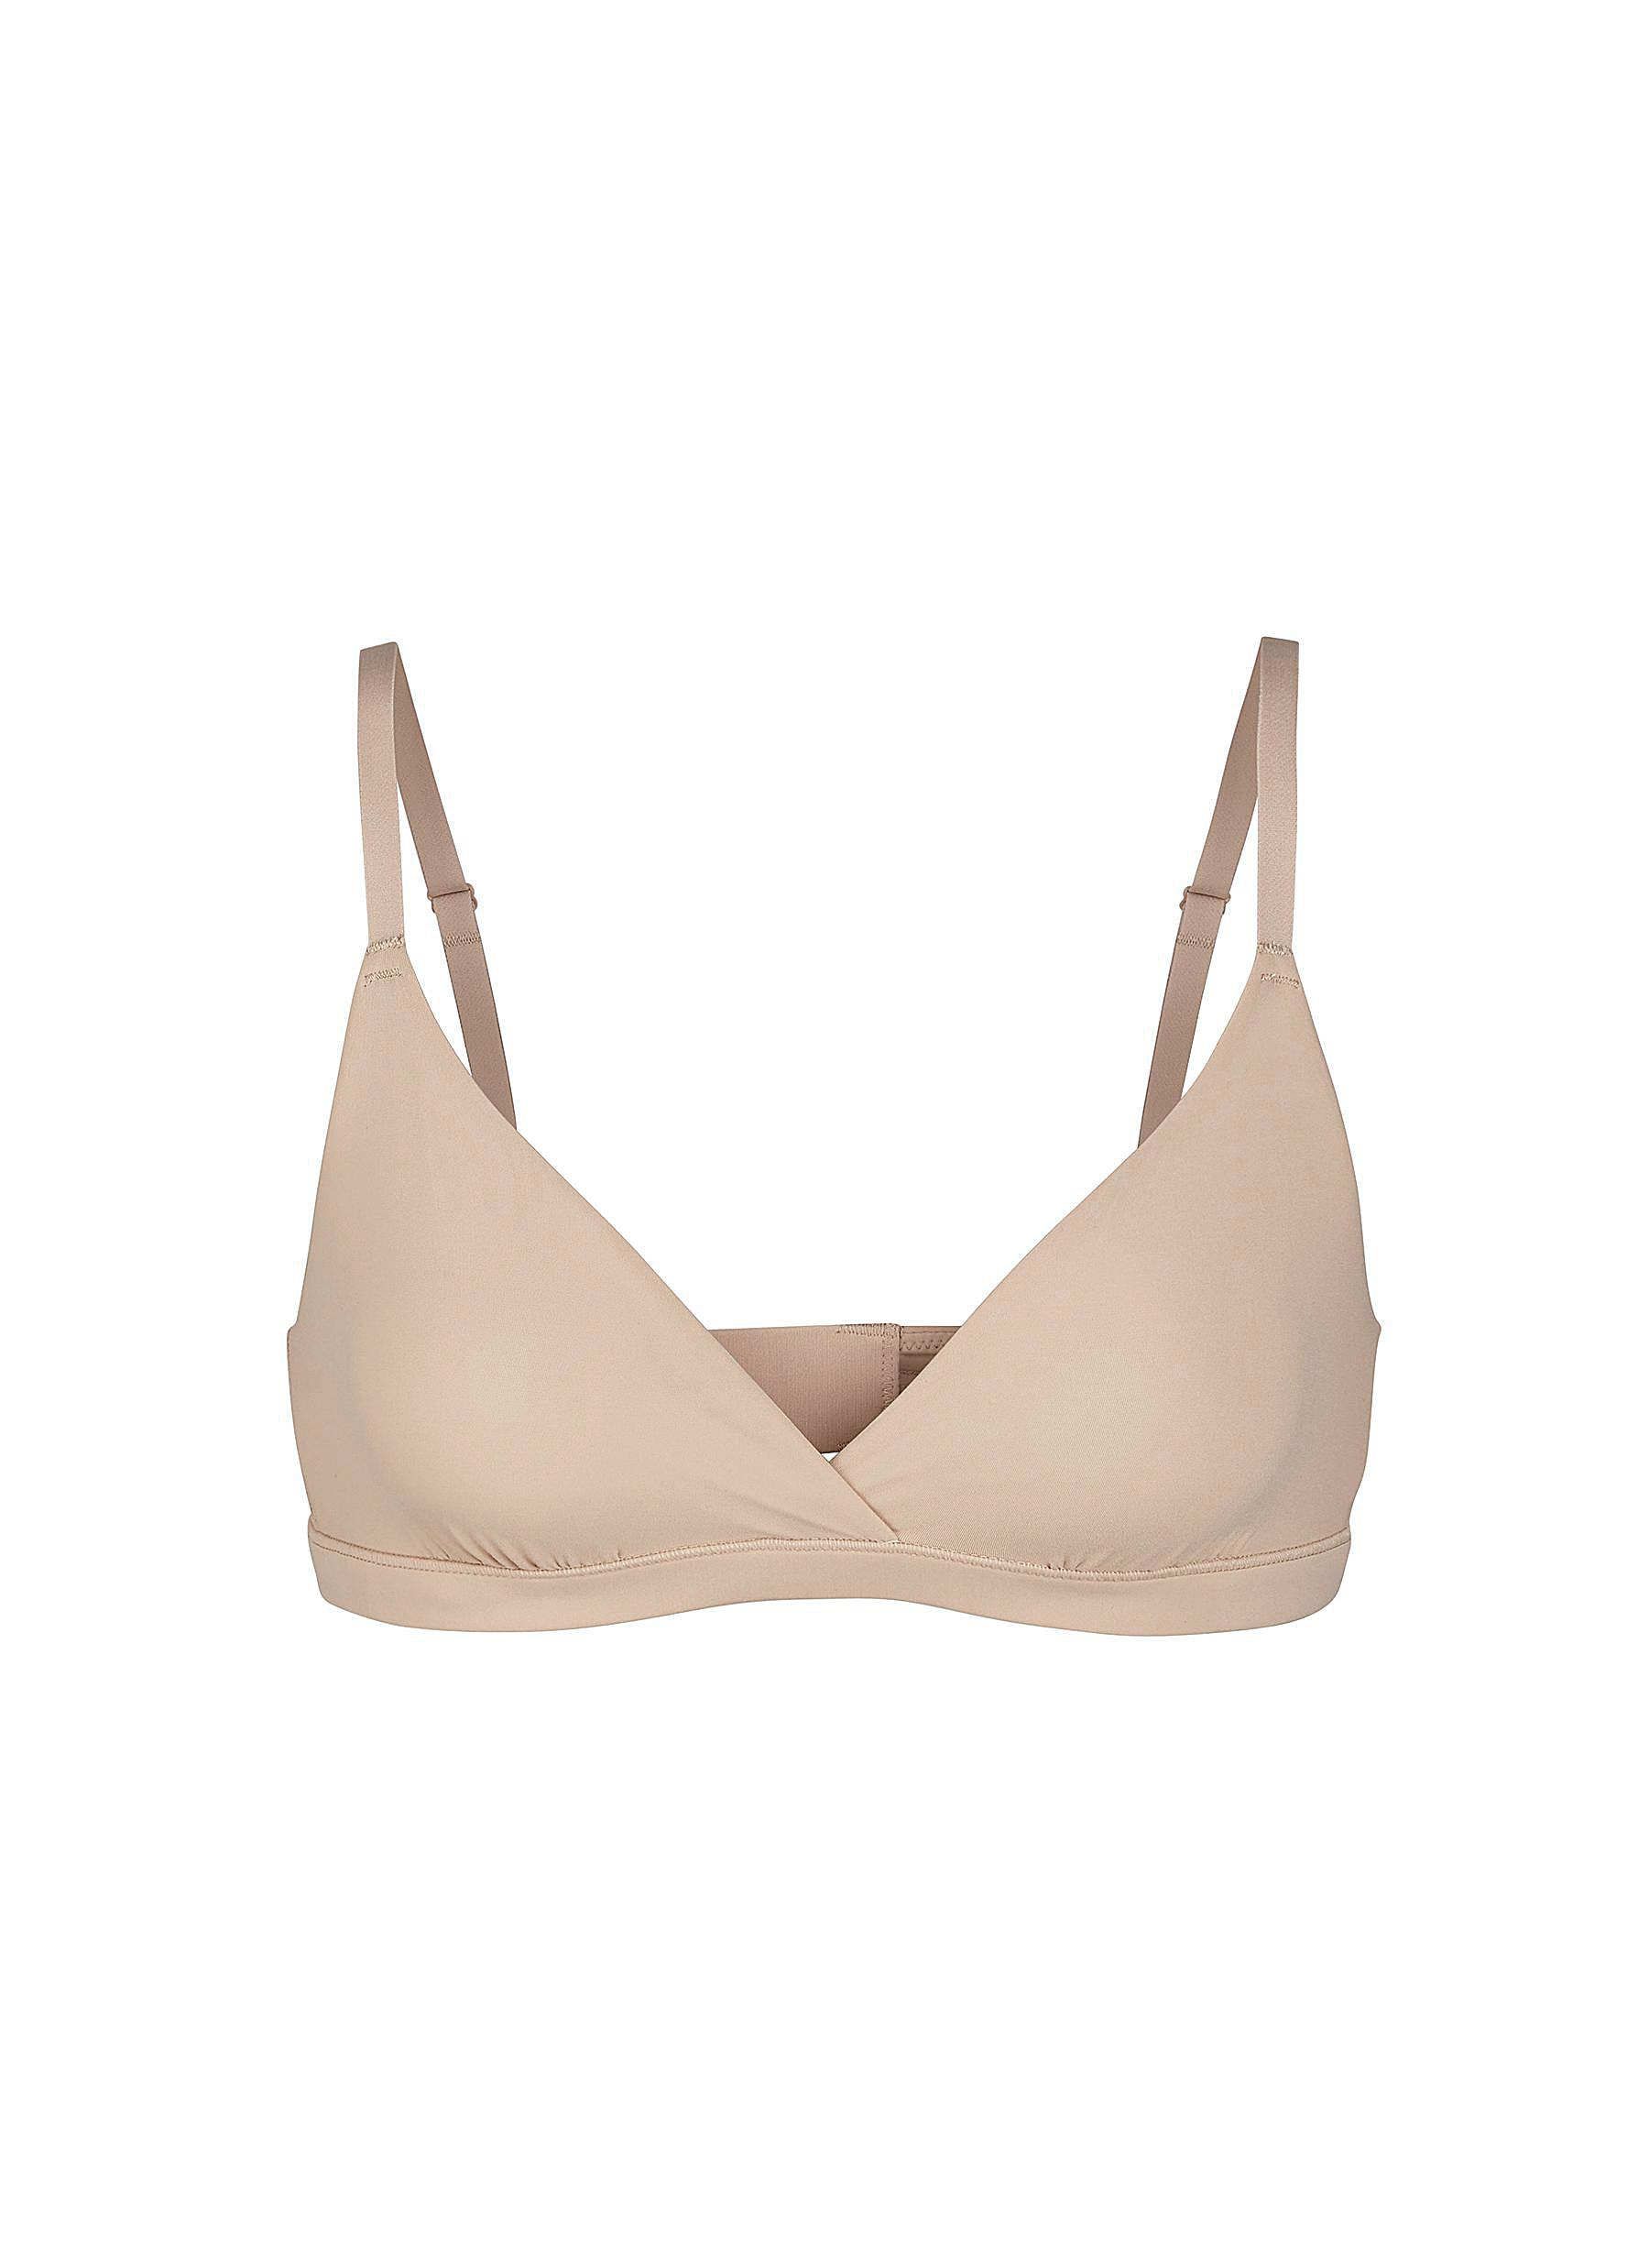 SKIMS Fits Everybody Triangle Bralette - Cocoa